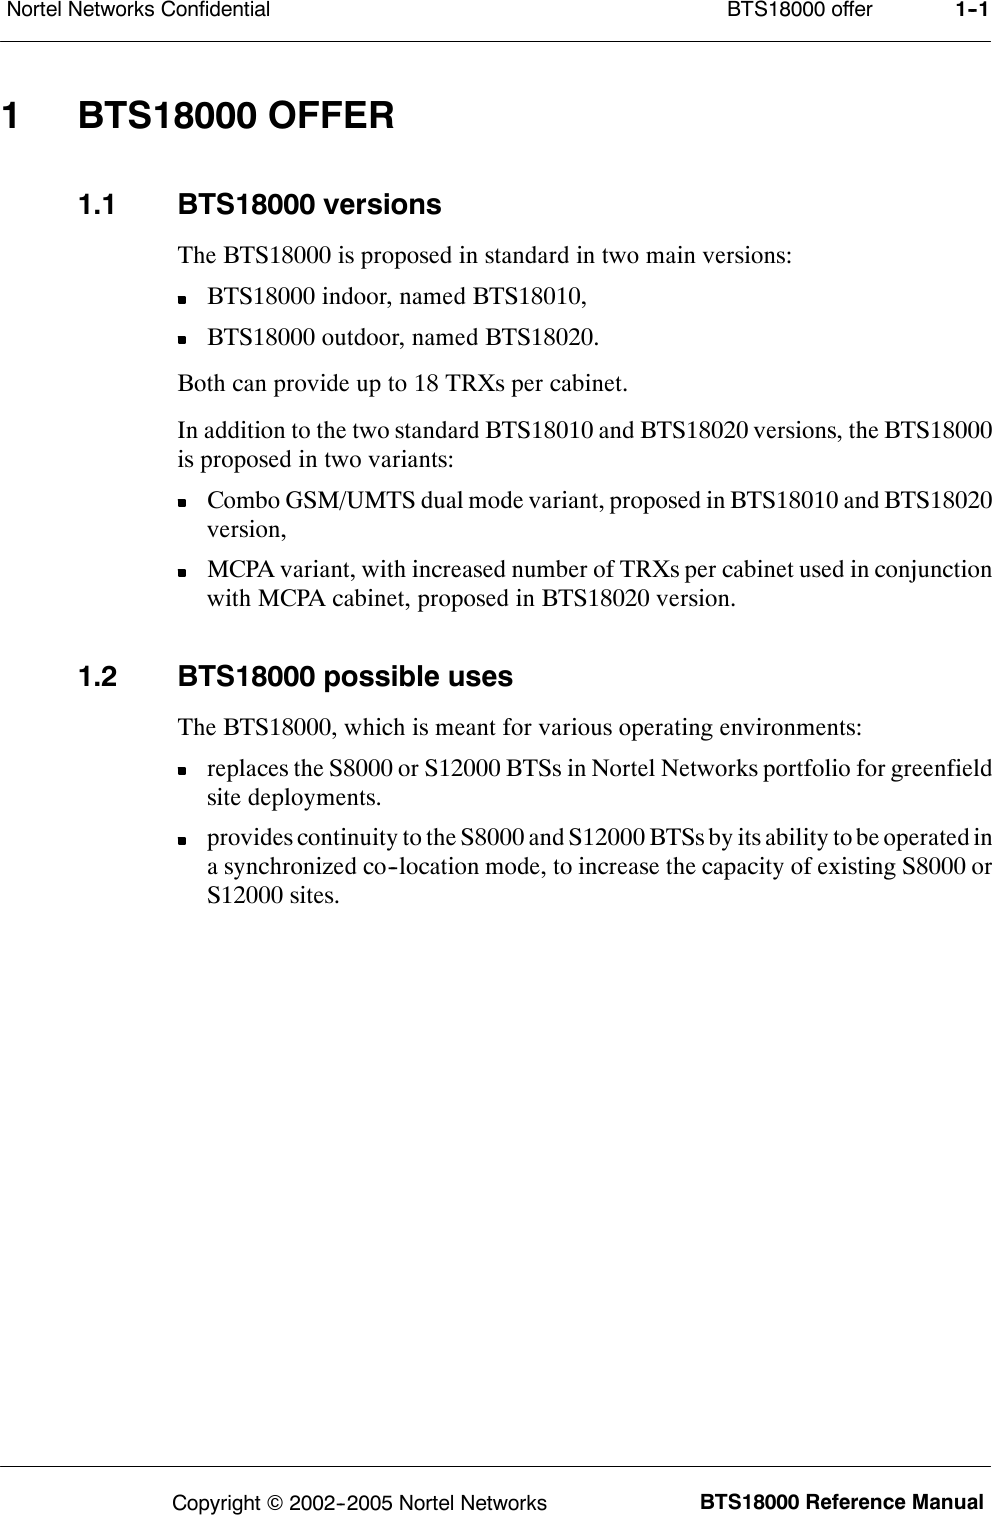 BTS18000 offerNortel Networks Confidential 1--1BTS18000 Reference ManualCopyright ©2002--2005 Nortel Networks1 BTS18000 OFFER1.1 BTS18000 versionsThe BTS18000 is proposed in standard in two main versions:BTS18000 indoor, named BTS18010,BTS18000 outdoor, named BTS18020.Both can provide up to 18 TRXs per cabinet.In addition to the two standard BTS18010 and BTS18020 versions, the BTS18000is proposed in two variants:Combo GSM/UMTS dual mode variant, proposed in BTS18010 and BTS18020version,MCPA variant, with increased number of TRXs per cabinet used in conjunctionwith MCPA cabinet, proposed in BTS18020 version.1.2 BTS18000 possible usesThe BTS18000, which is meant for various operating environments:replaces the S8000 or S12000 BTSs in Nortel Networks portfolio for greenfieldsite deployments.provides continuity to the S8000 and S12000 BTSs by its ability to be operated ina synchronized co--location mode, to increase the capacity of existing S8000 orS12000 sites.